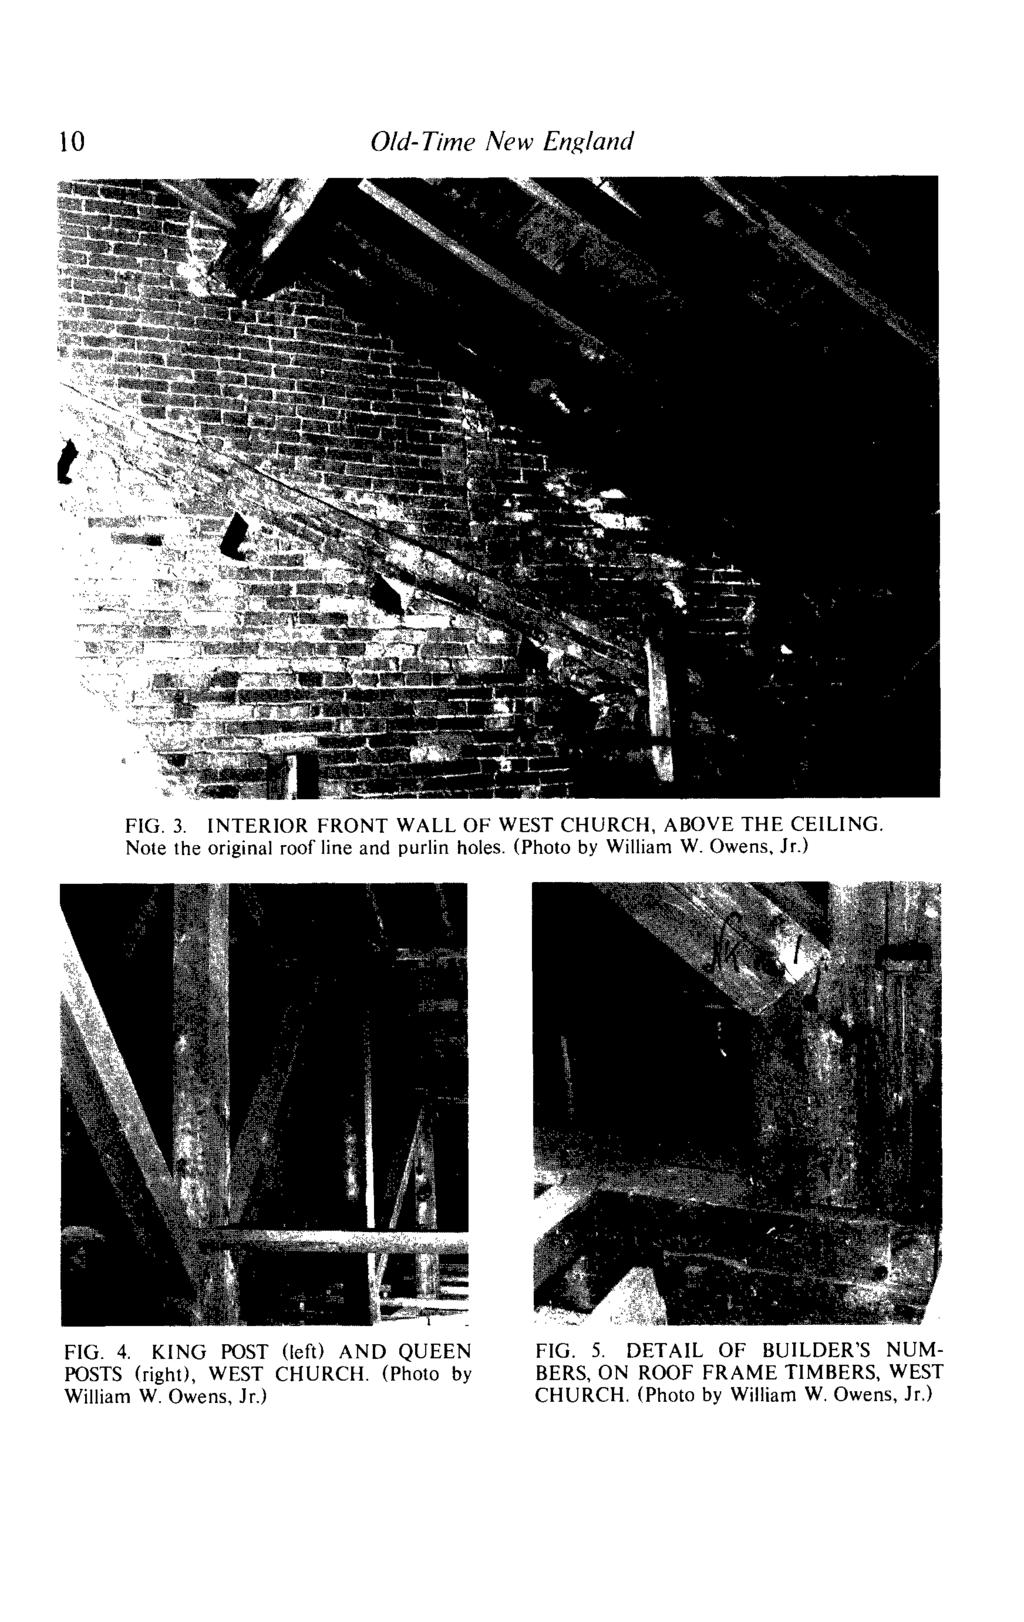 10 Old- Time New England FIG. 3. INTERIOR FRONT WALL OF WEST CHURCH, ABOVE THE CEILING. Note the original roof line and purlin holes. (Photo by William W. Owens, Jr.) FIG. 4.